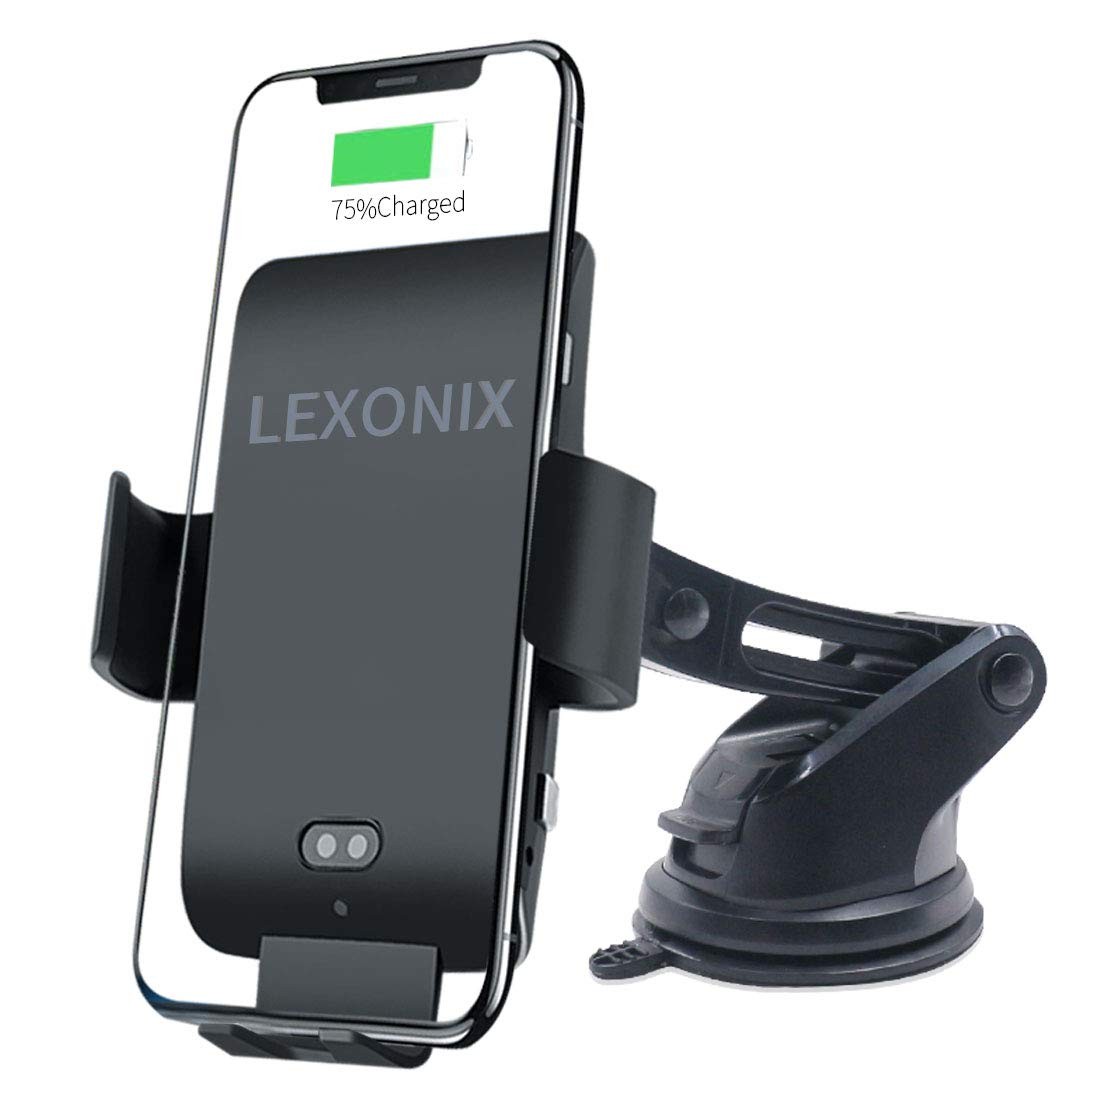 LEXONIX Wireless Car Charger Mount Qi Wireless Car Charger Fast Charging Phone Holder for Car Provides 10w for Samsung Galaxy S10 S10 S9 S9 S8 S8 or